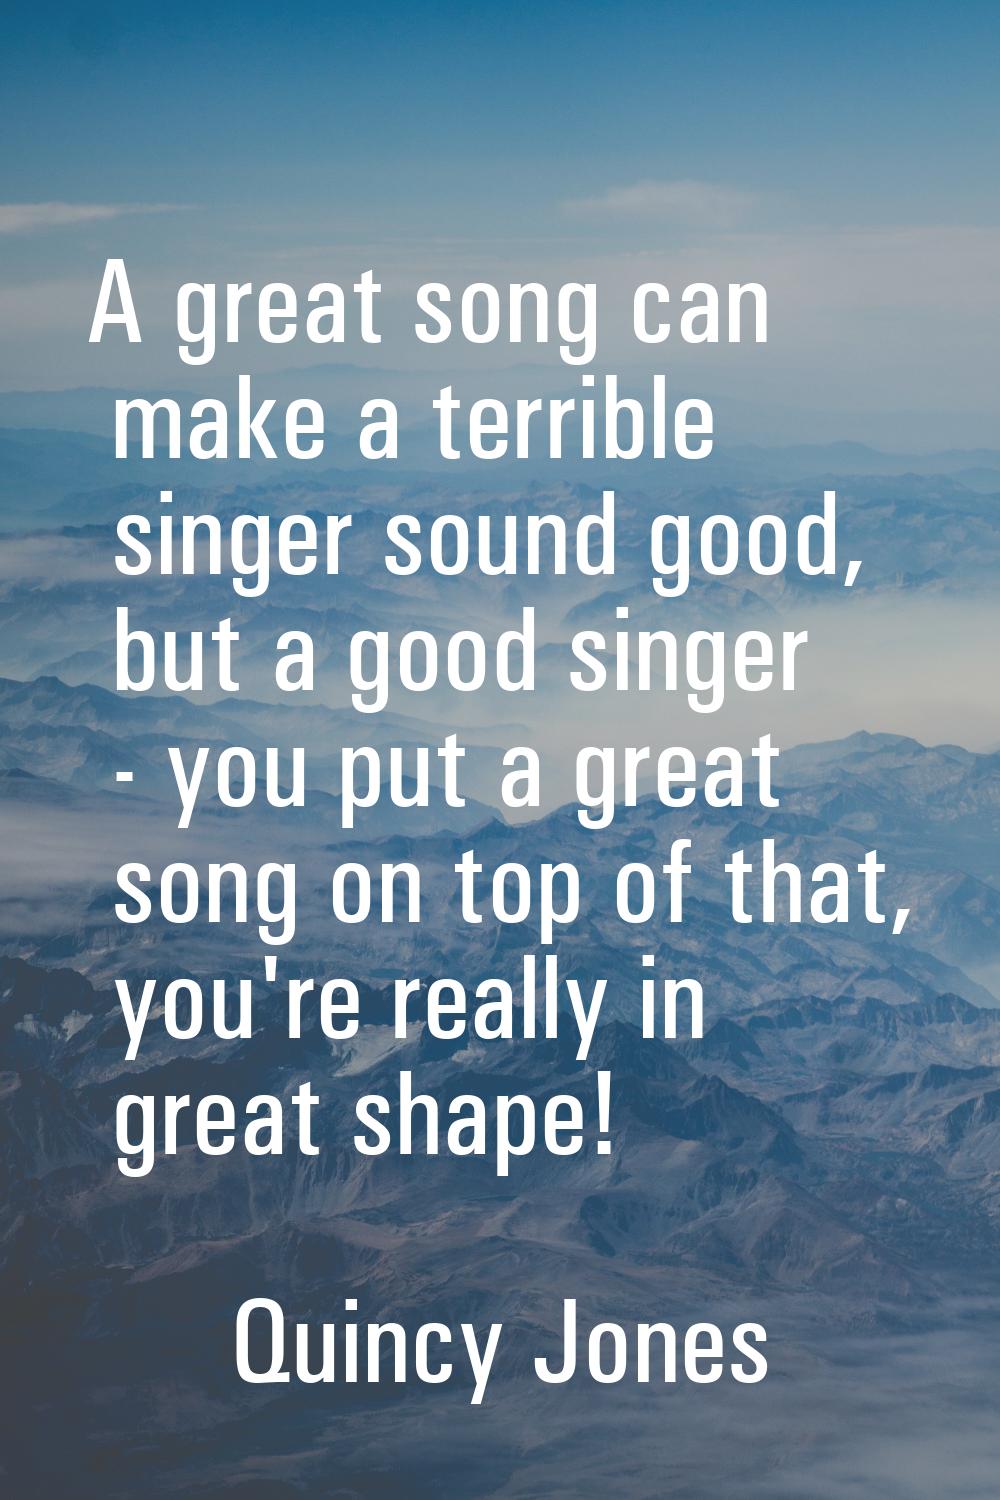 A great song can make a terrible singer sound good, but a good singer - you put a great song on top